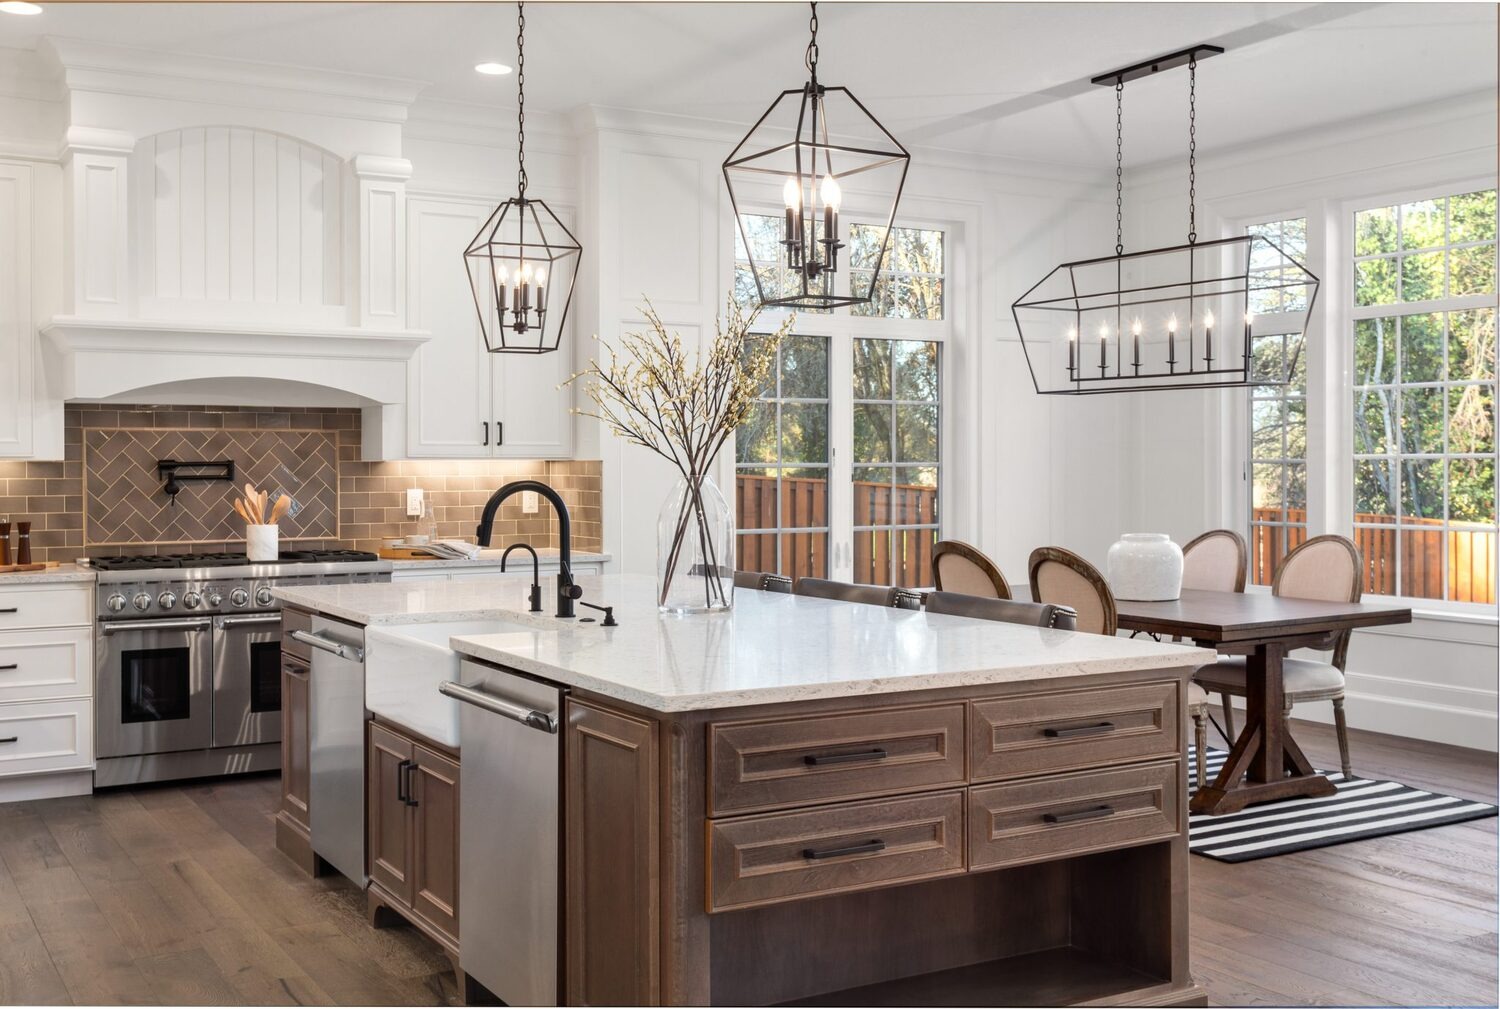 The kitchen remodeling Glenview project resulted in a beautiful traditional space with white and brown wooden elements